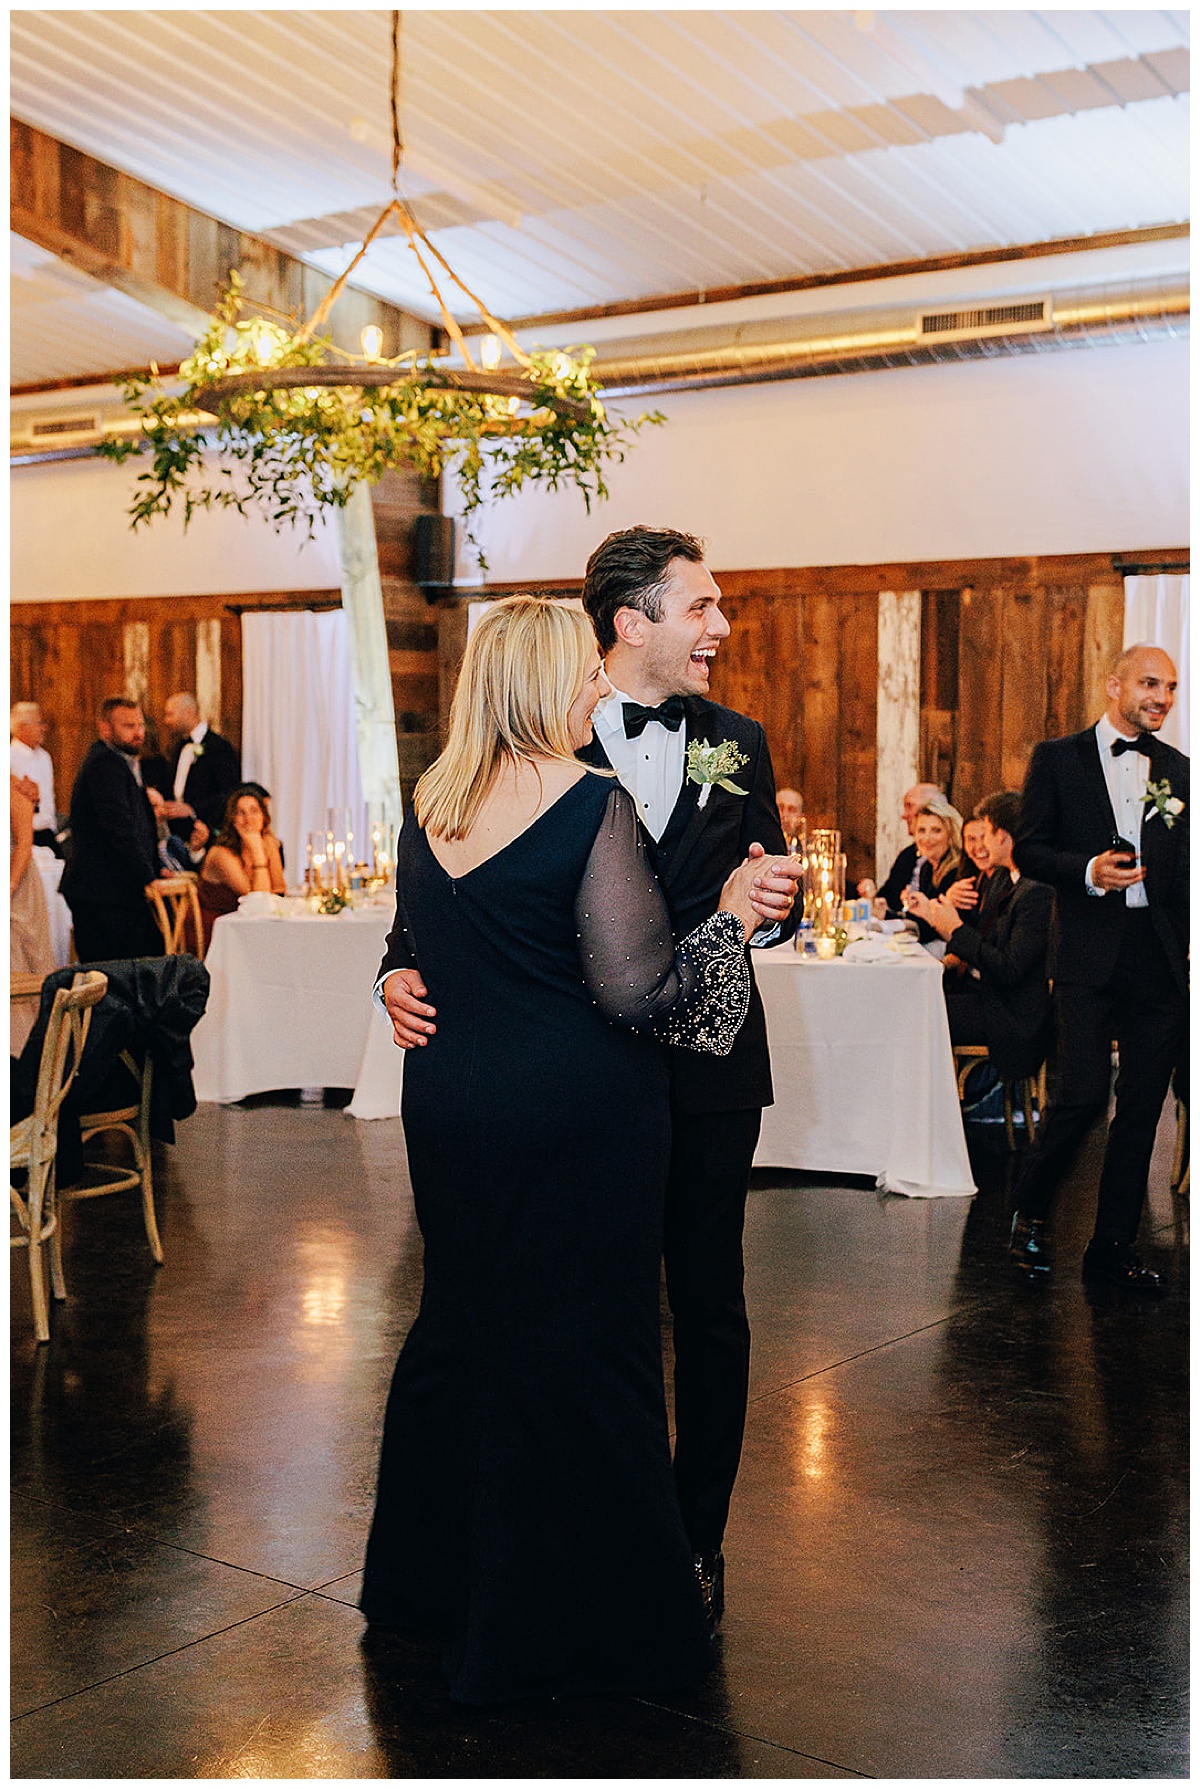 Mother and son dance together at Charming Michigan Wedding